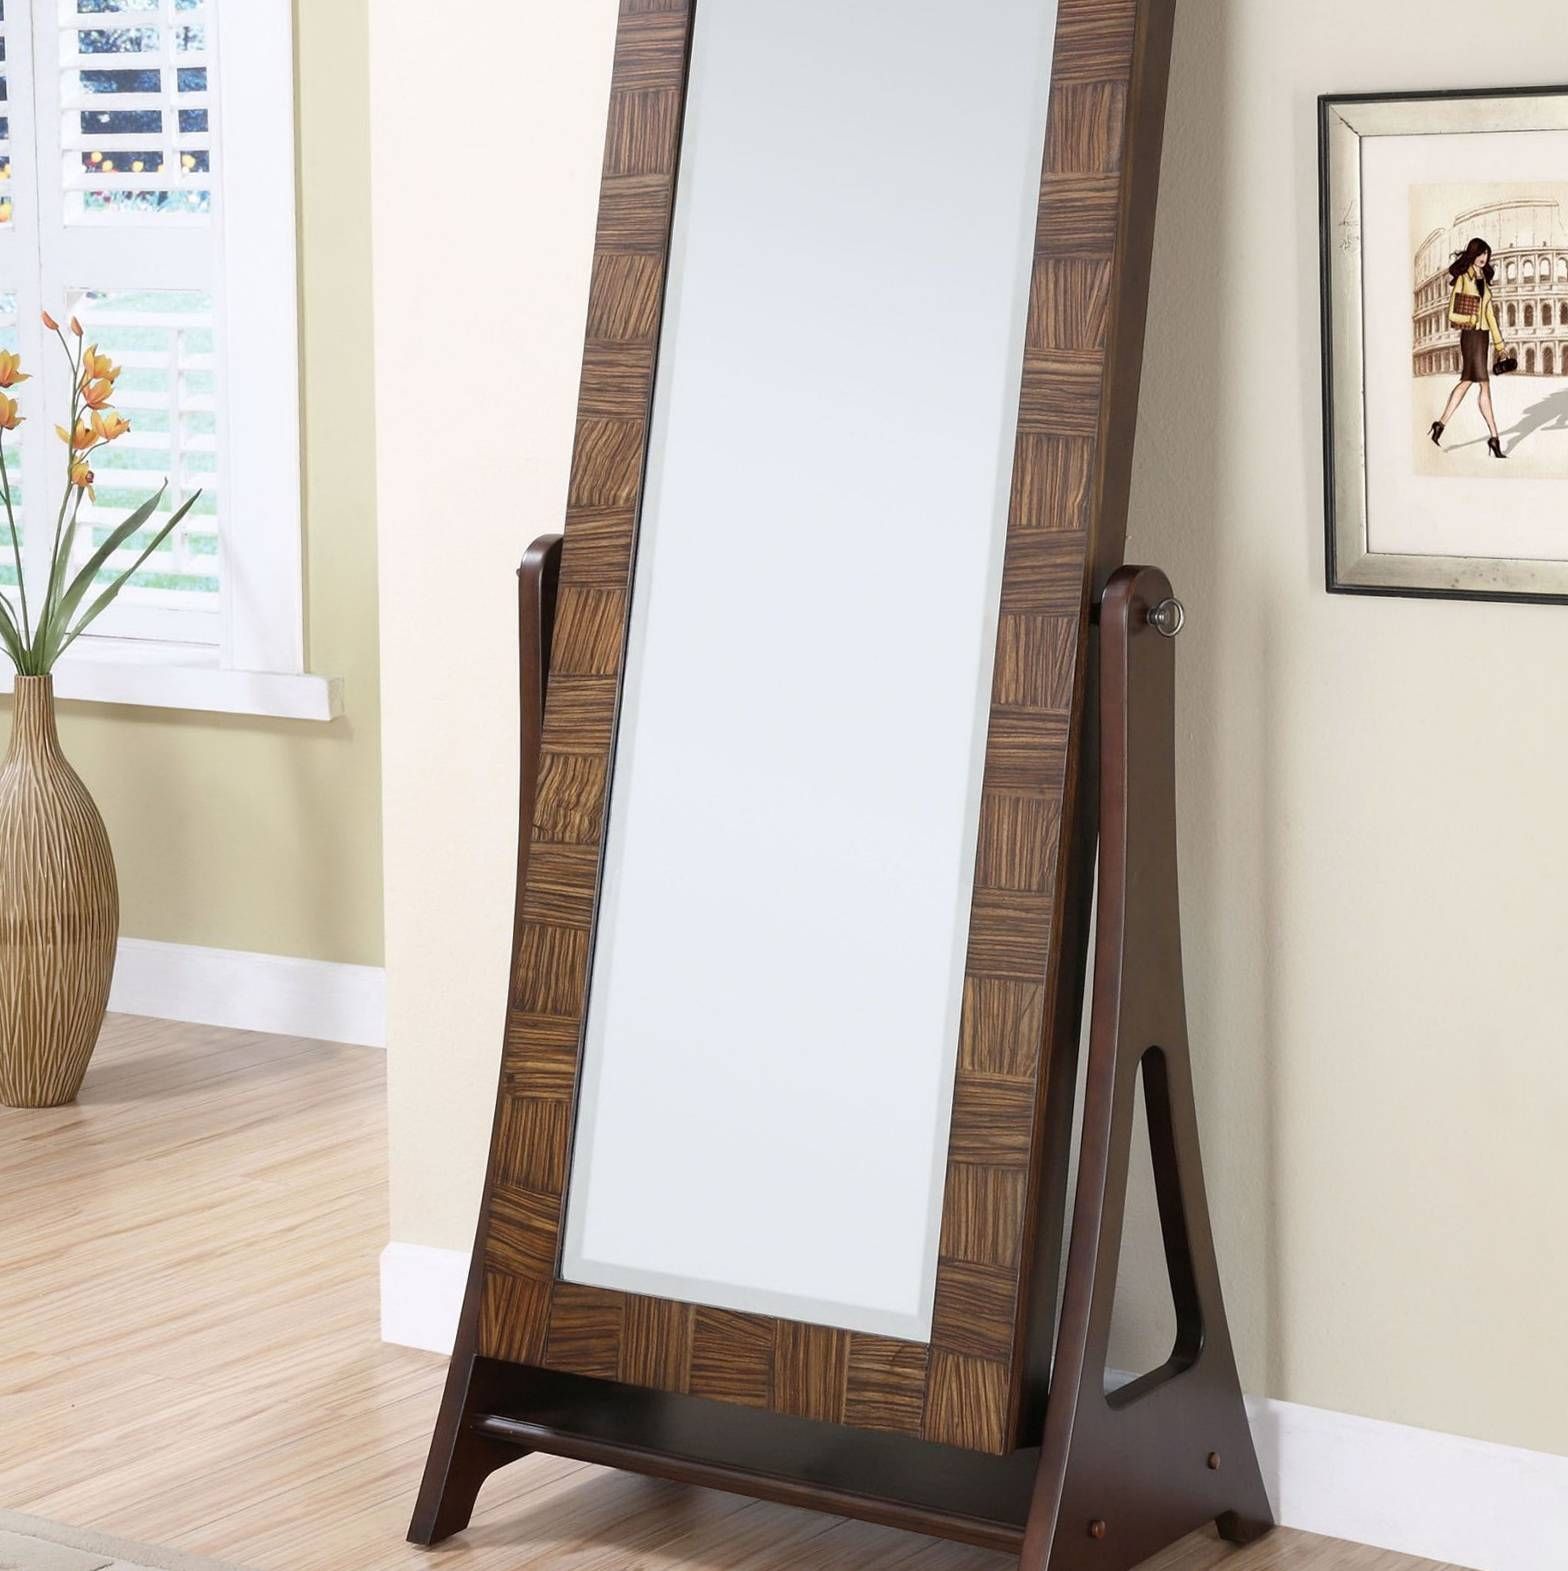 Furniture: Black Jewelry Armoire Mirror On Wooden Floor And Cream In Cream Standing Mirrors (View 1 of 25)